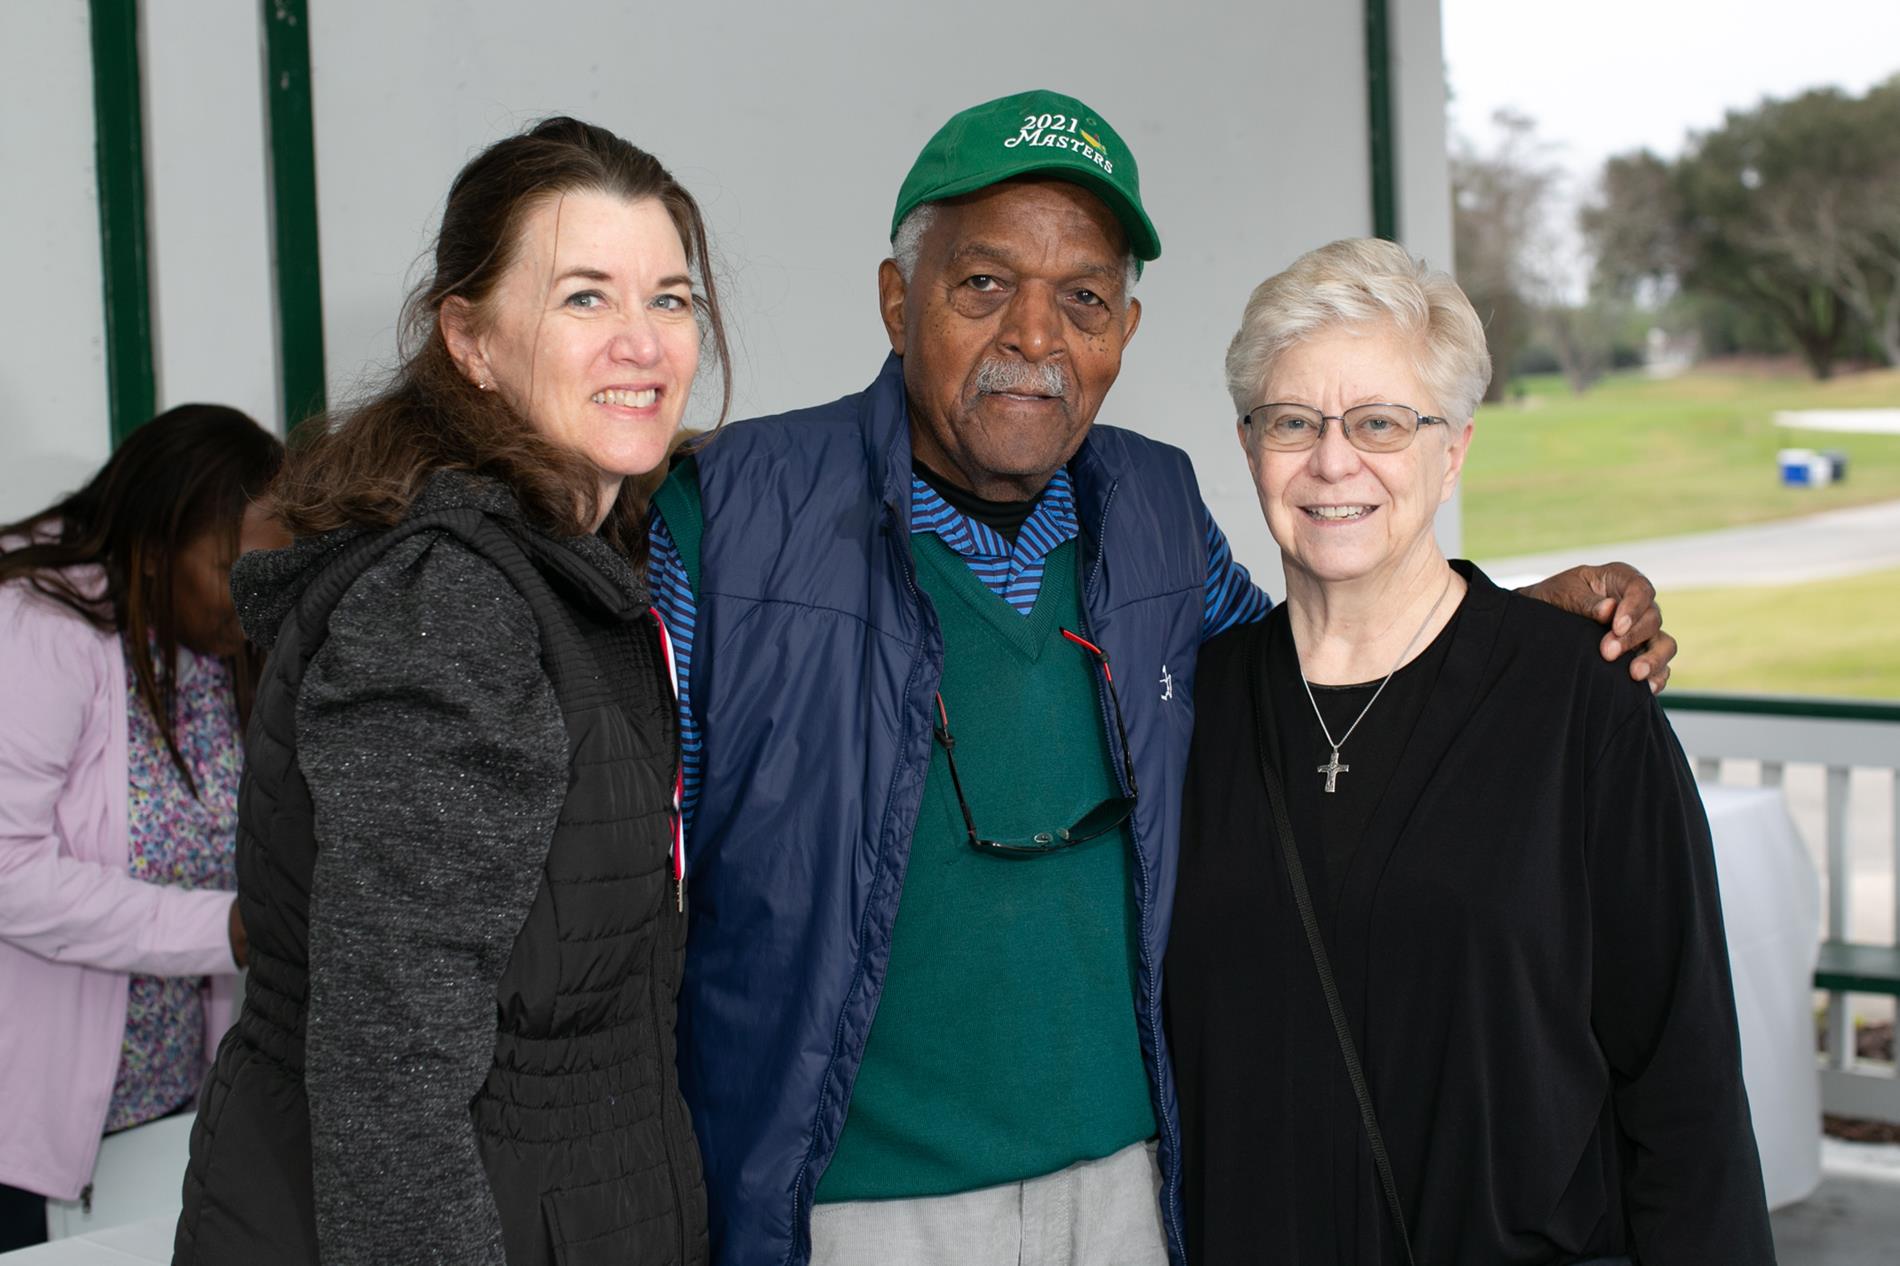 Guardian Board member Michelle Sammet, Golf Committee Chair Ron Townsend, and Guardian Head of School Sr. Dianne Rumschlag